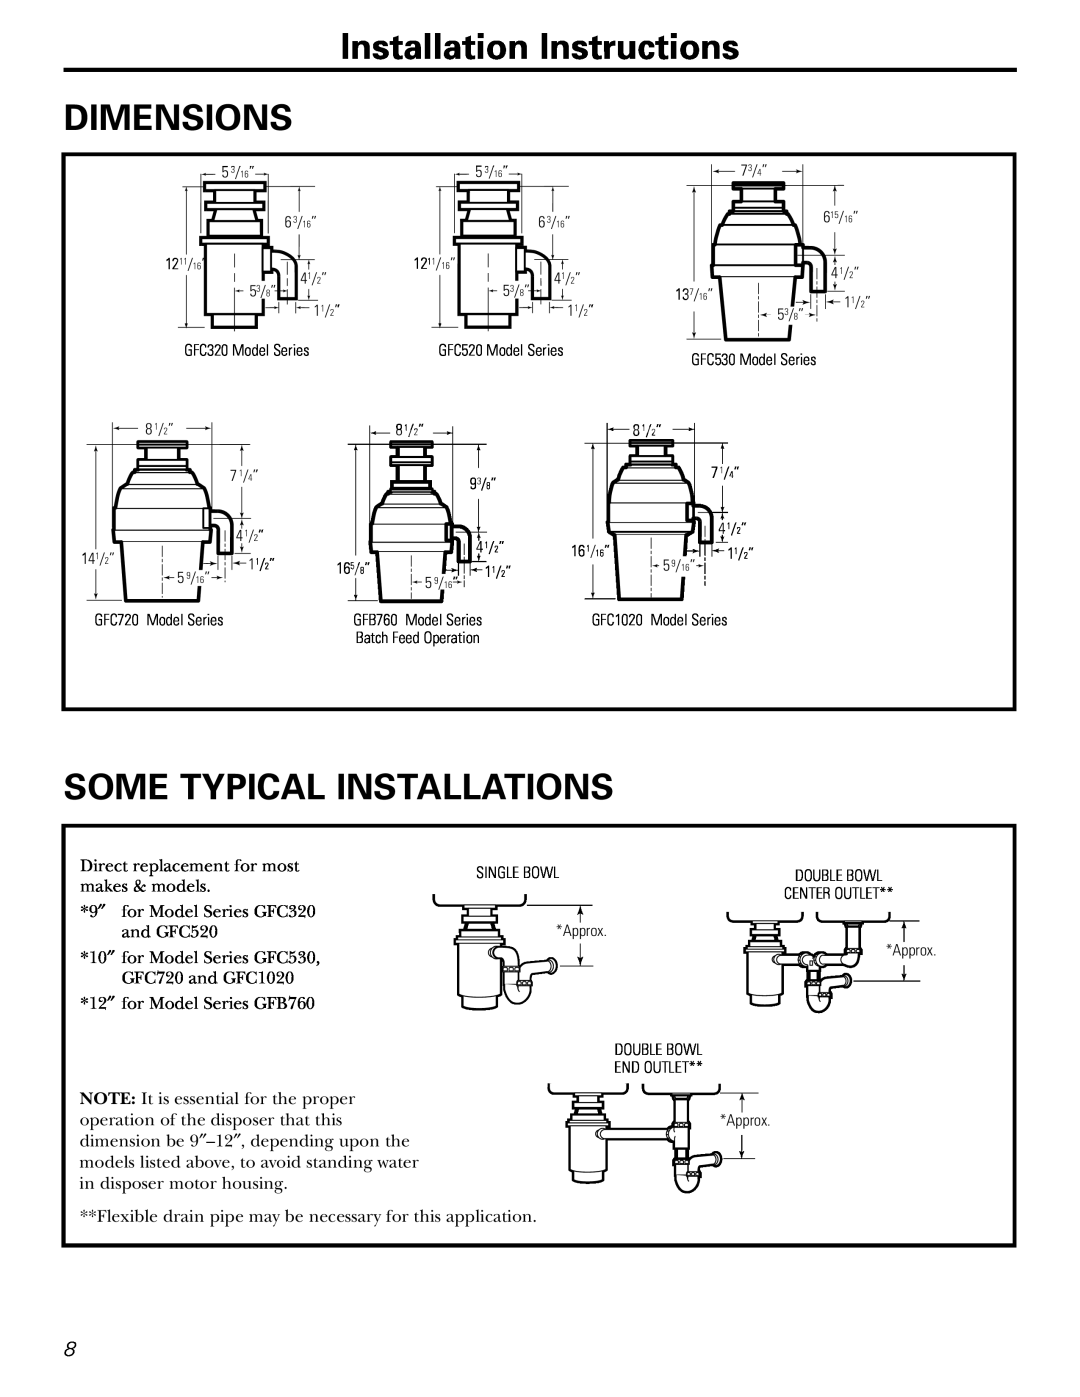 GE GFC520, GFC530, GFC1020, GFB760, GFC320, GFC720 owner manual Installation Instructions DIMENSIONS, Some Typical Installations 